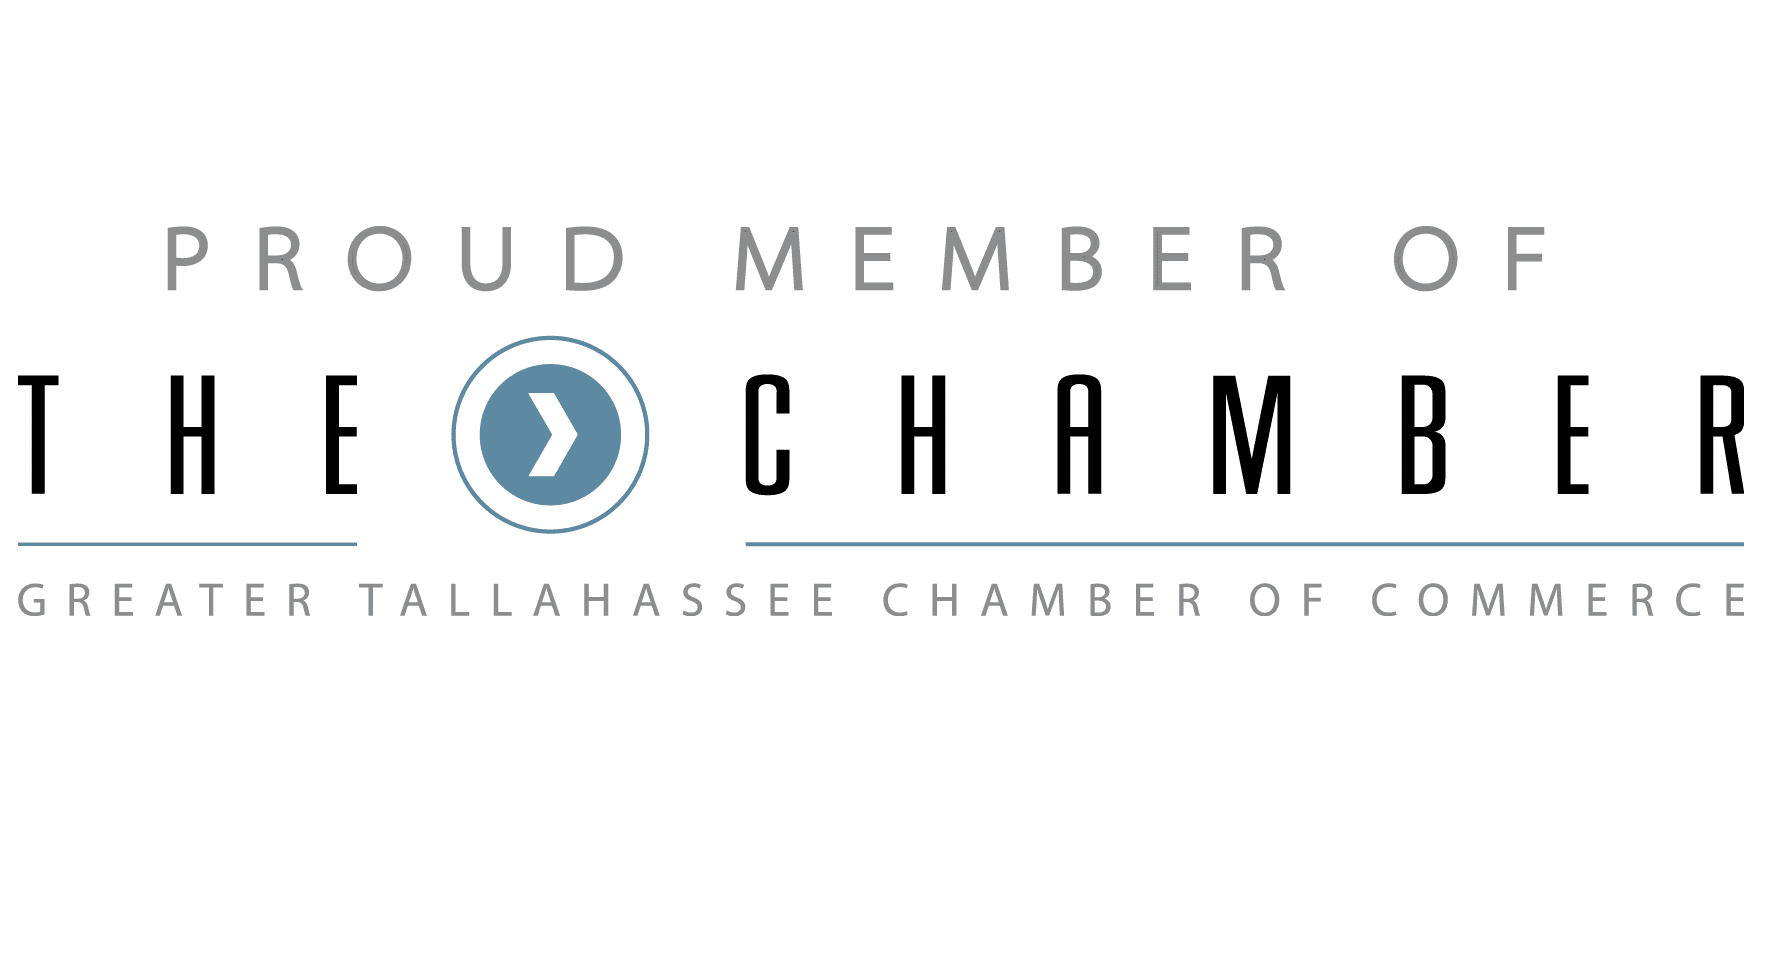 Tallahassee Chamber of commerce logo